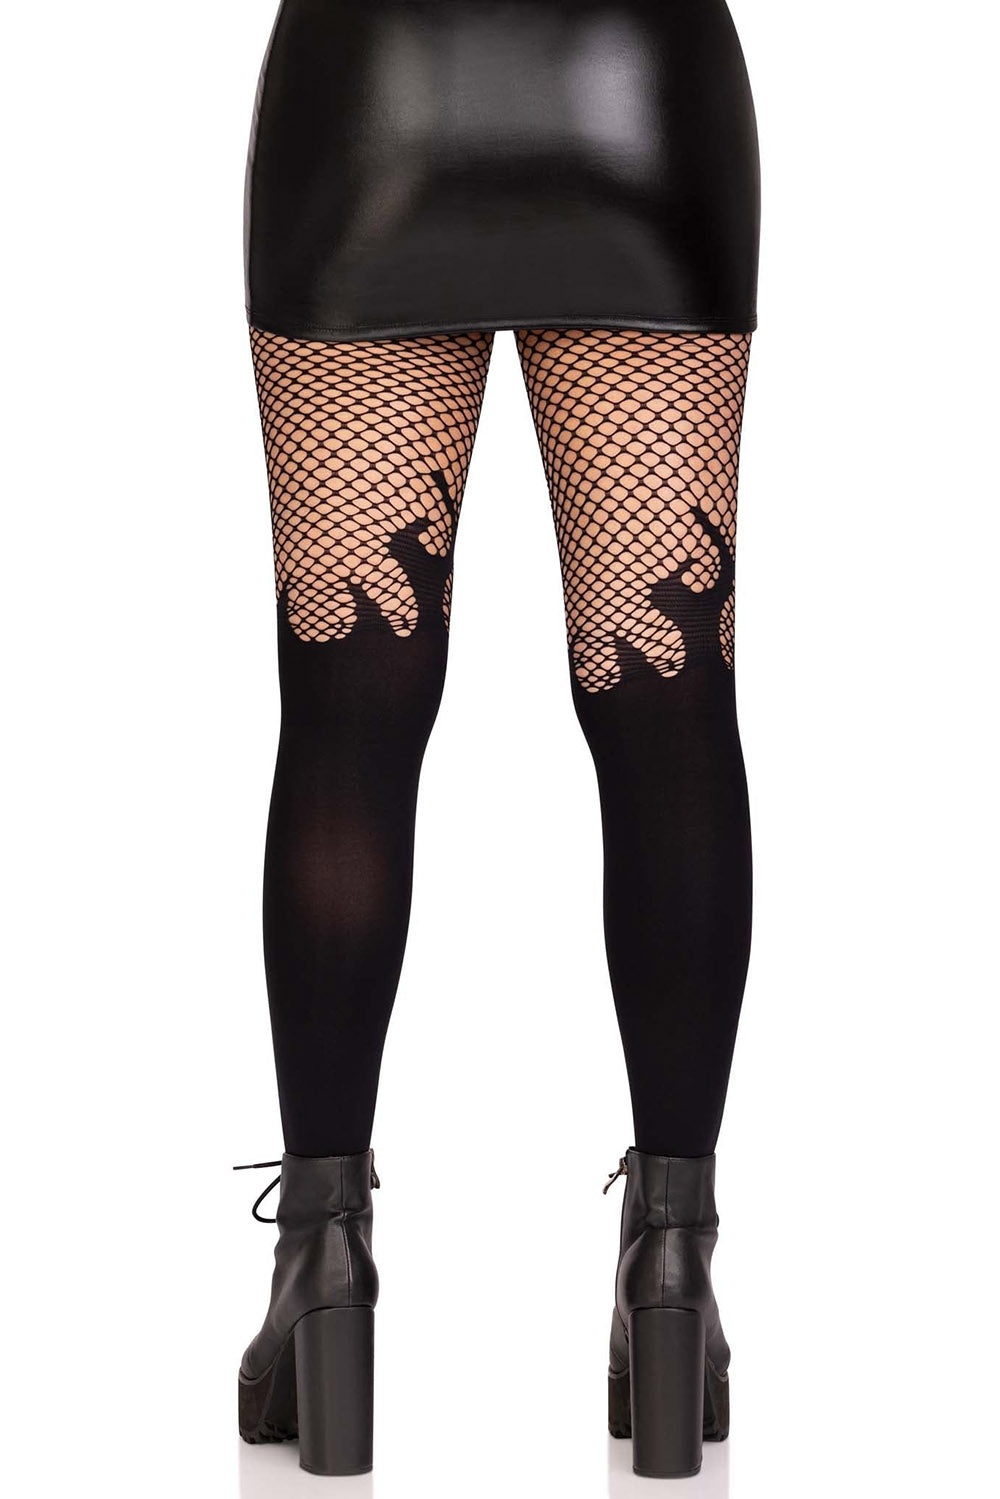 fire tights womens